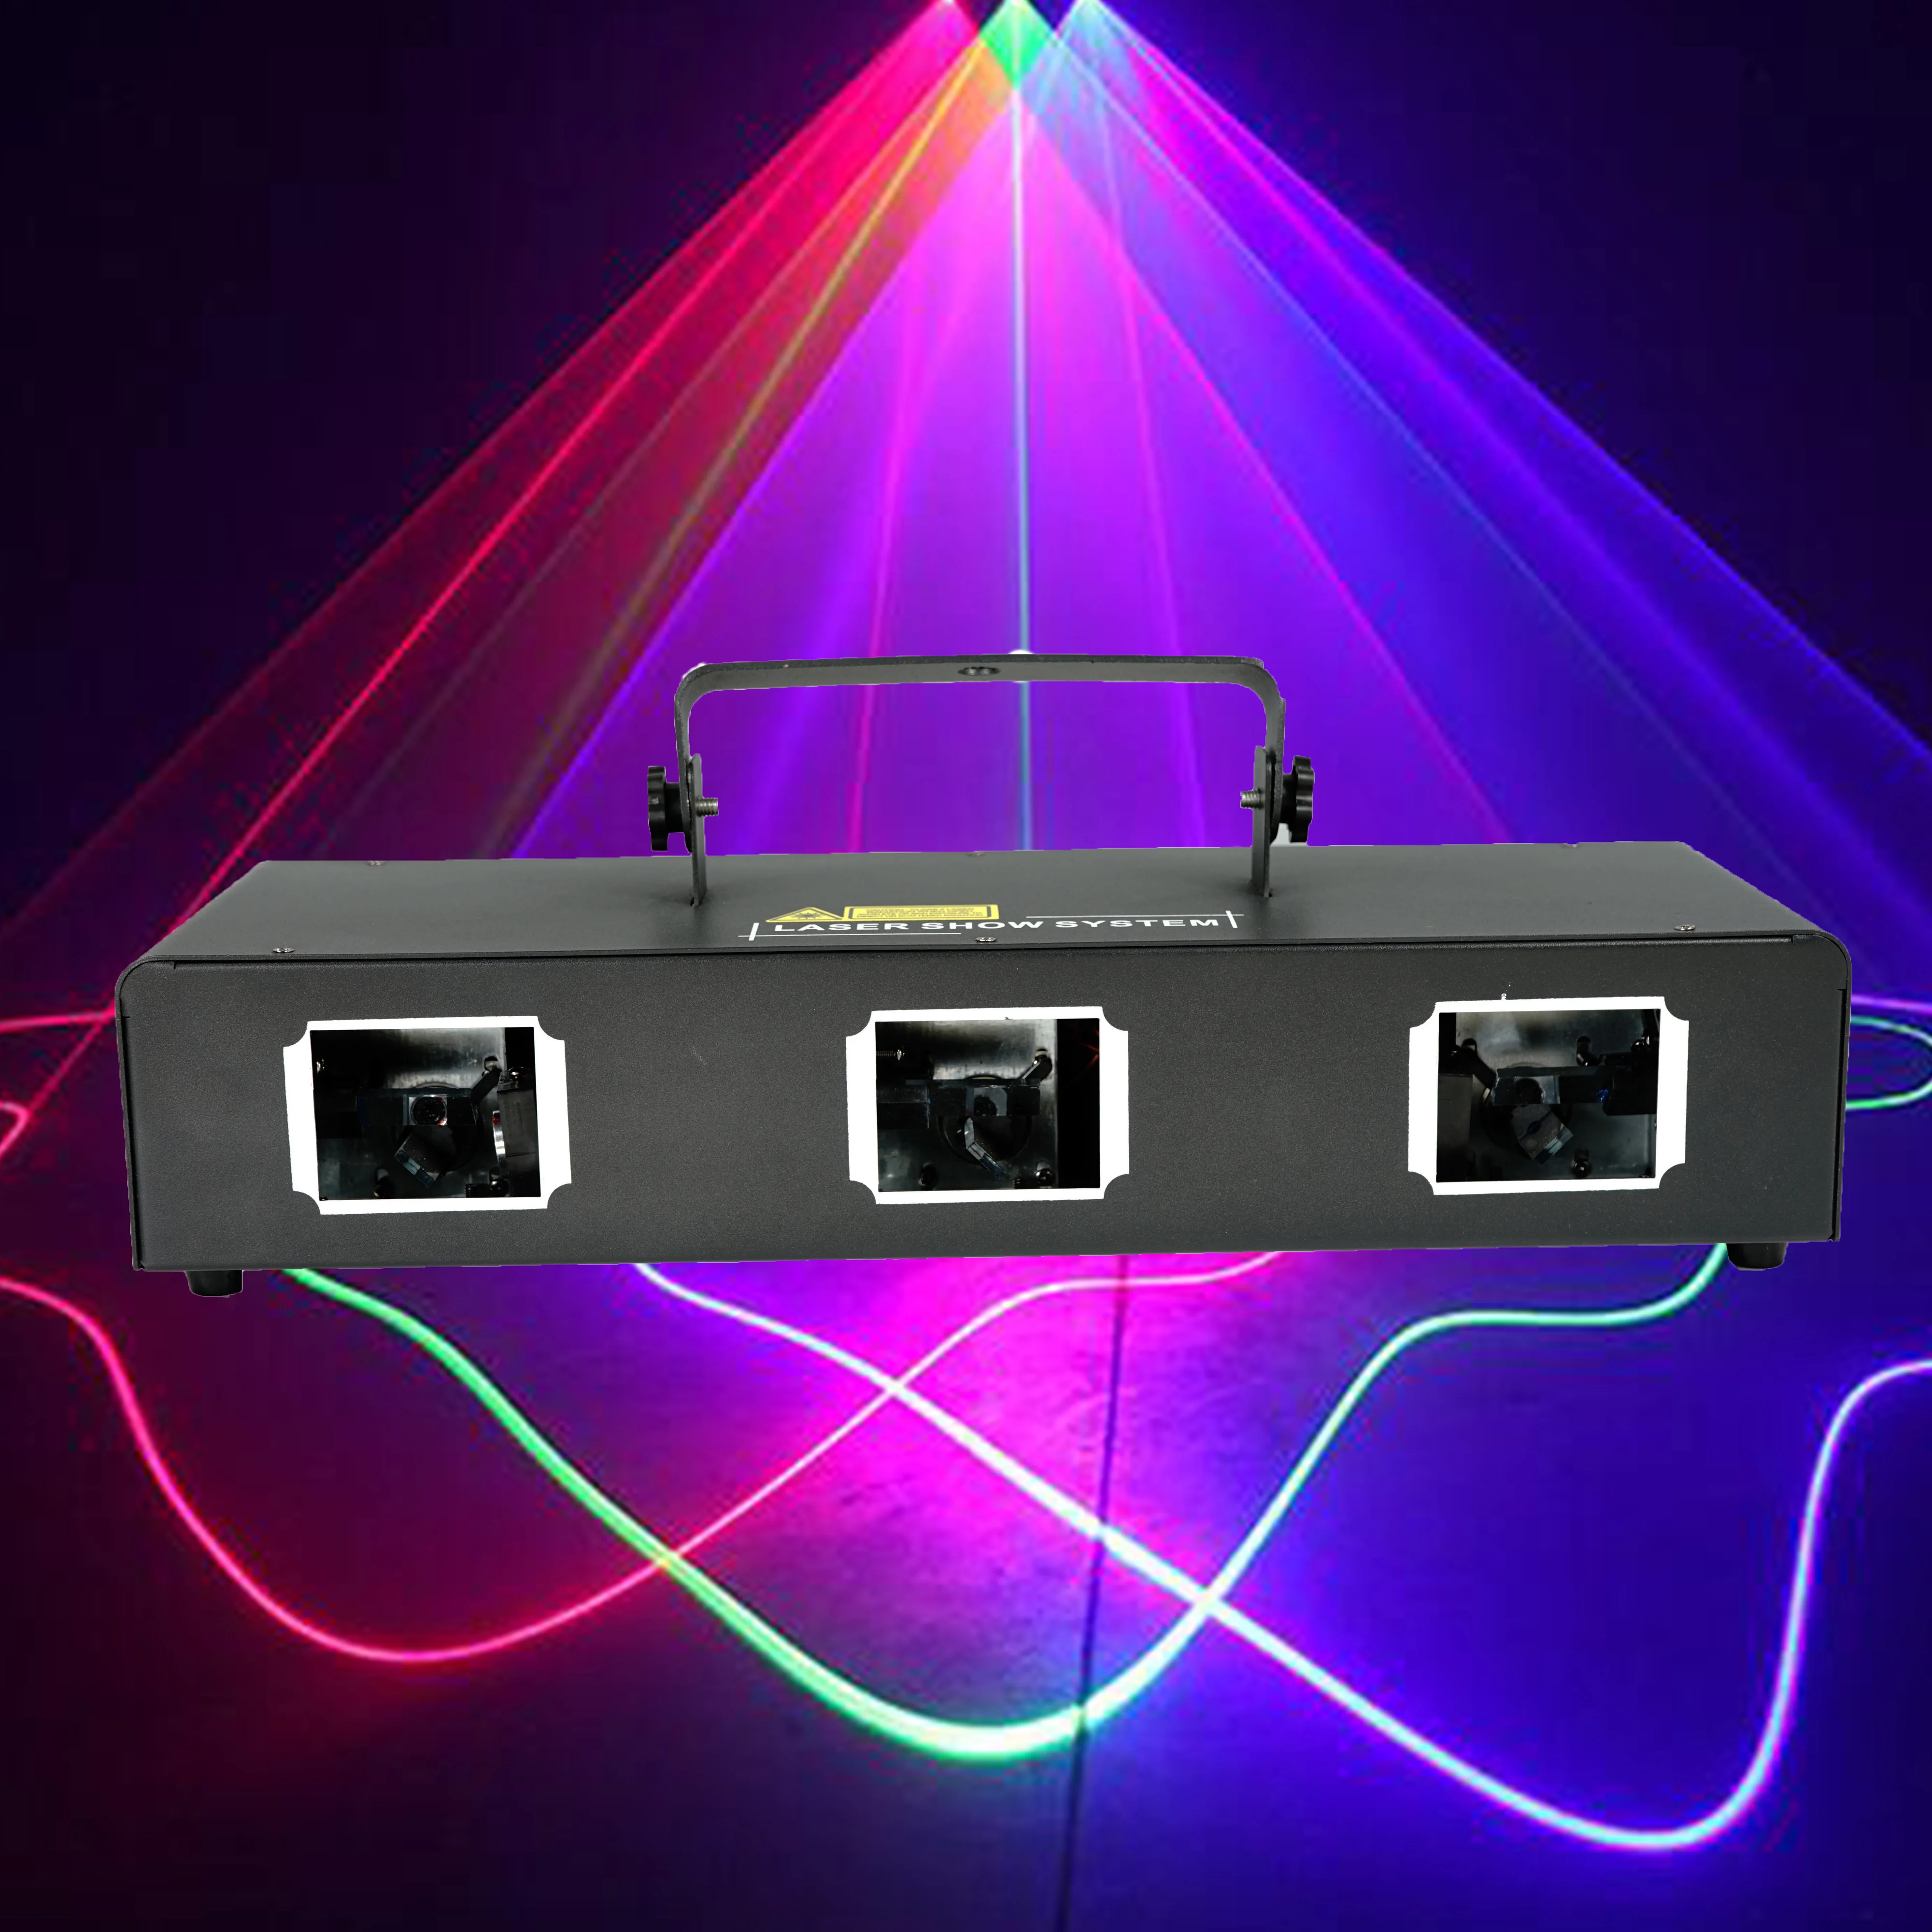 Yayao three-hole DJ laser light projector with DMX control professional disco party lighting